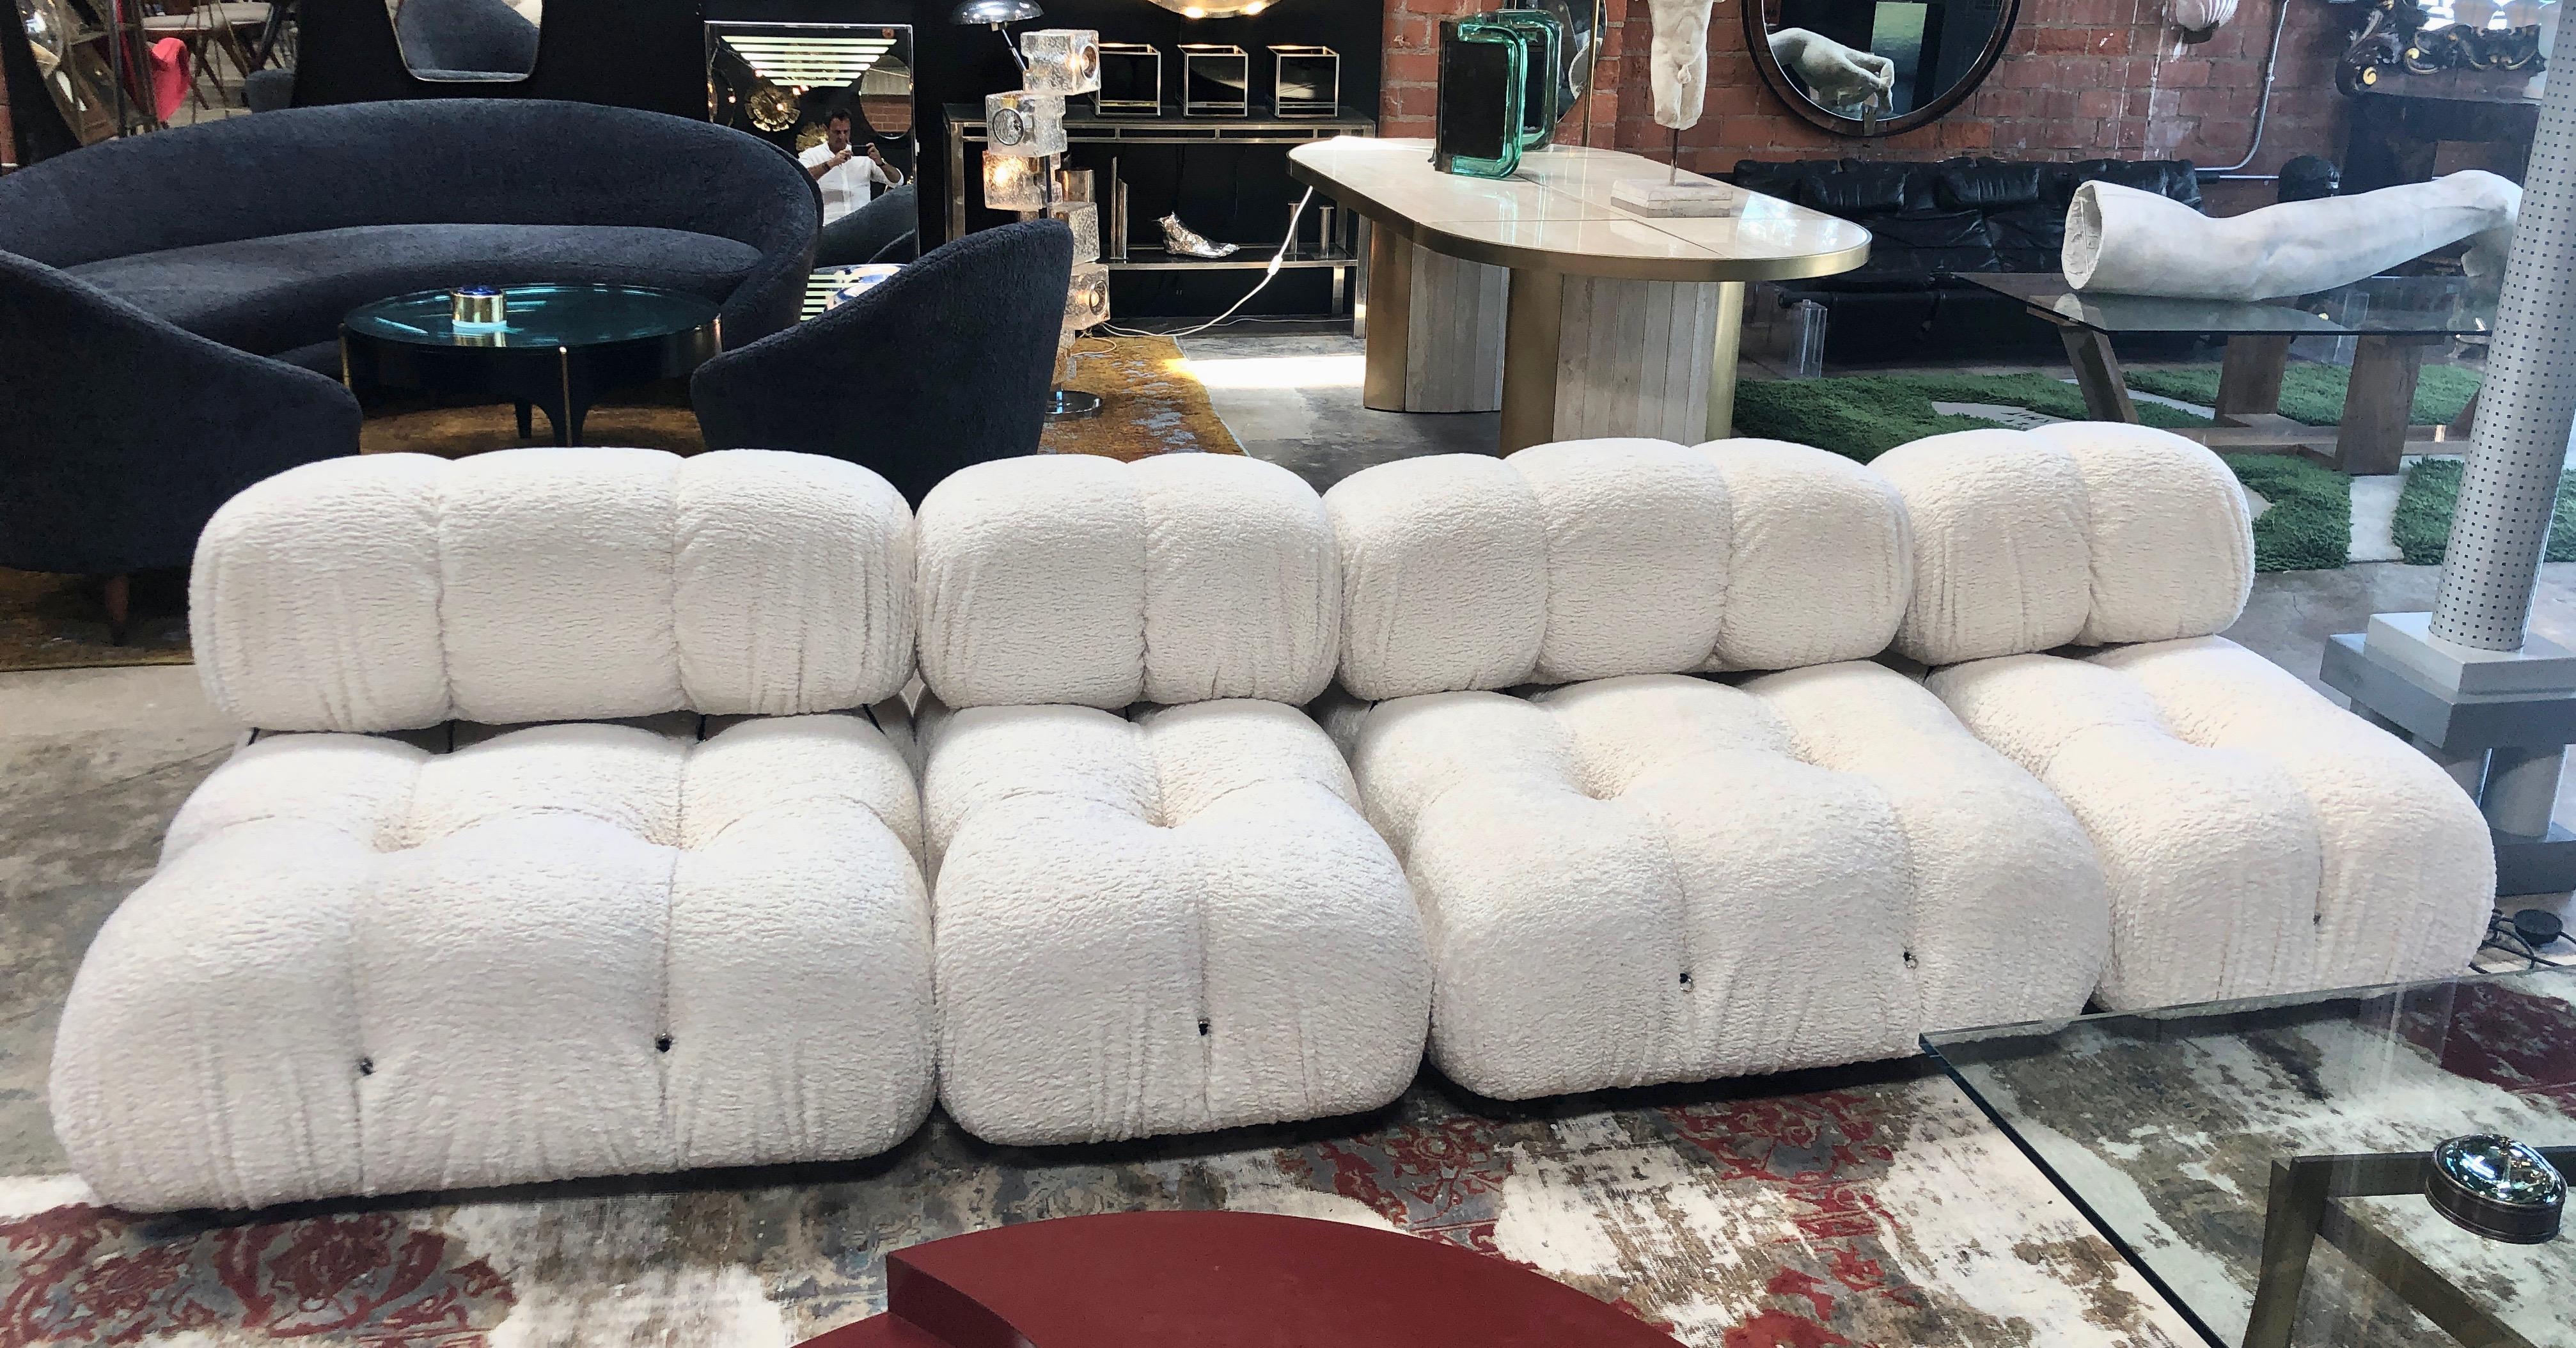 Camaleonda sectional sofa by Mario Bellini, 1970s
Mario Bellini, modular 'Camaleonda' sofa reupholstered in white sheep fabric , Italy, 1972.
This sofa consists out of modular elements. The design became famous almost immediately after it was